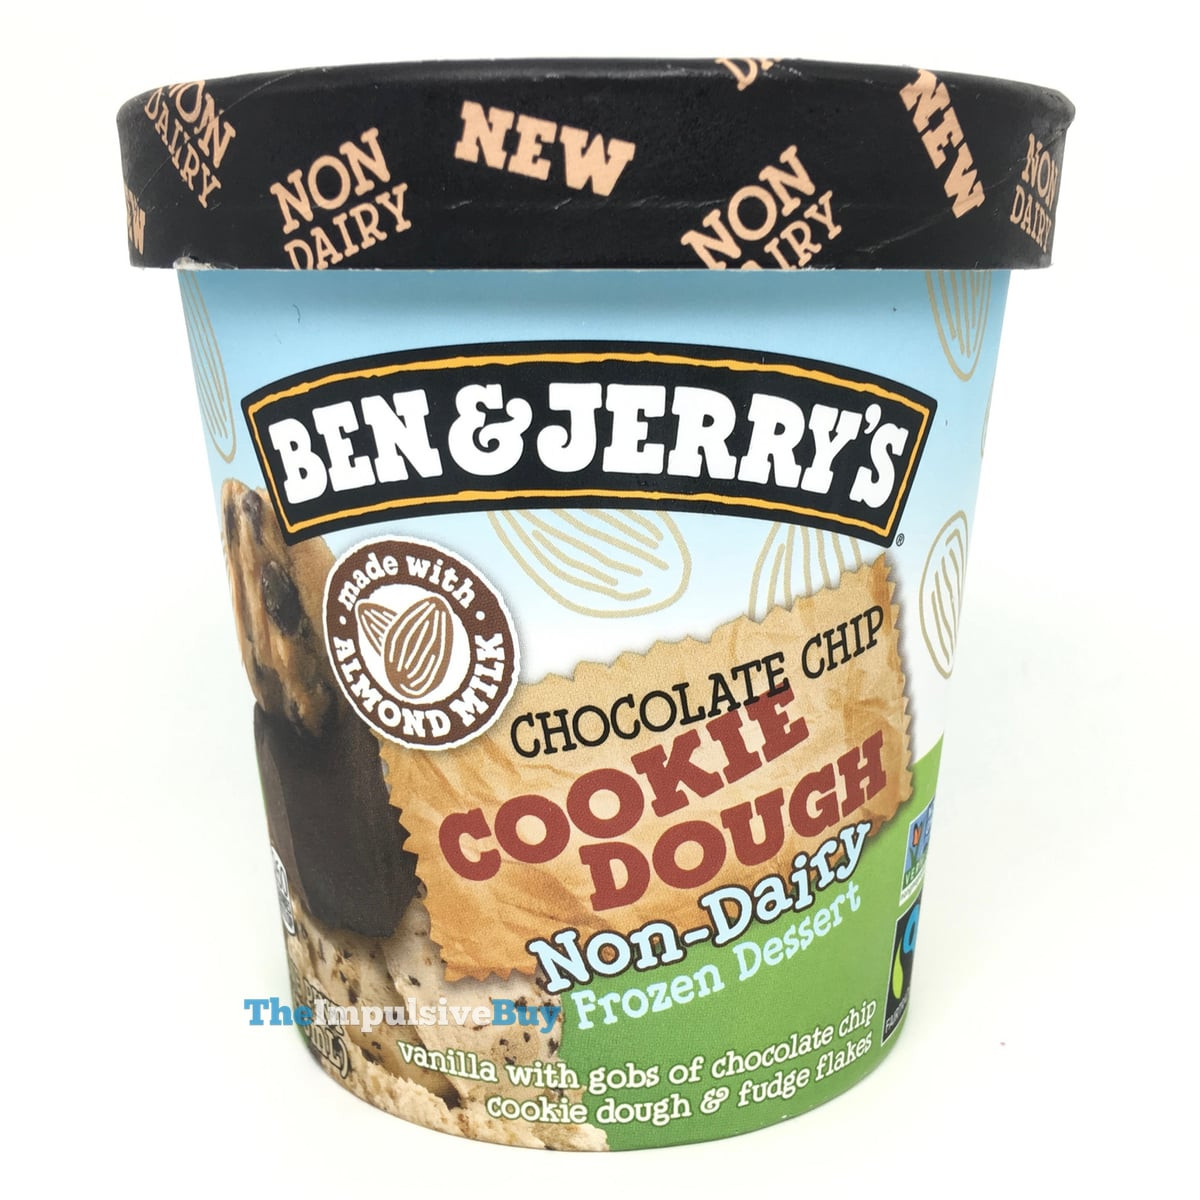 Non Dairy Chocolate Chip Cookies
 REVIEW Ben & Jerry’s Chocolate Chip Cookie Dough Non